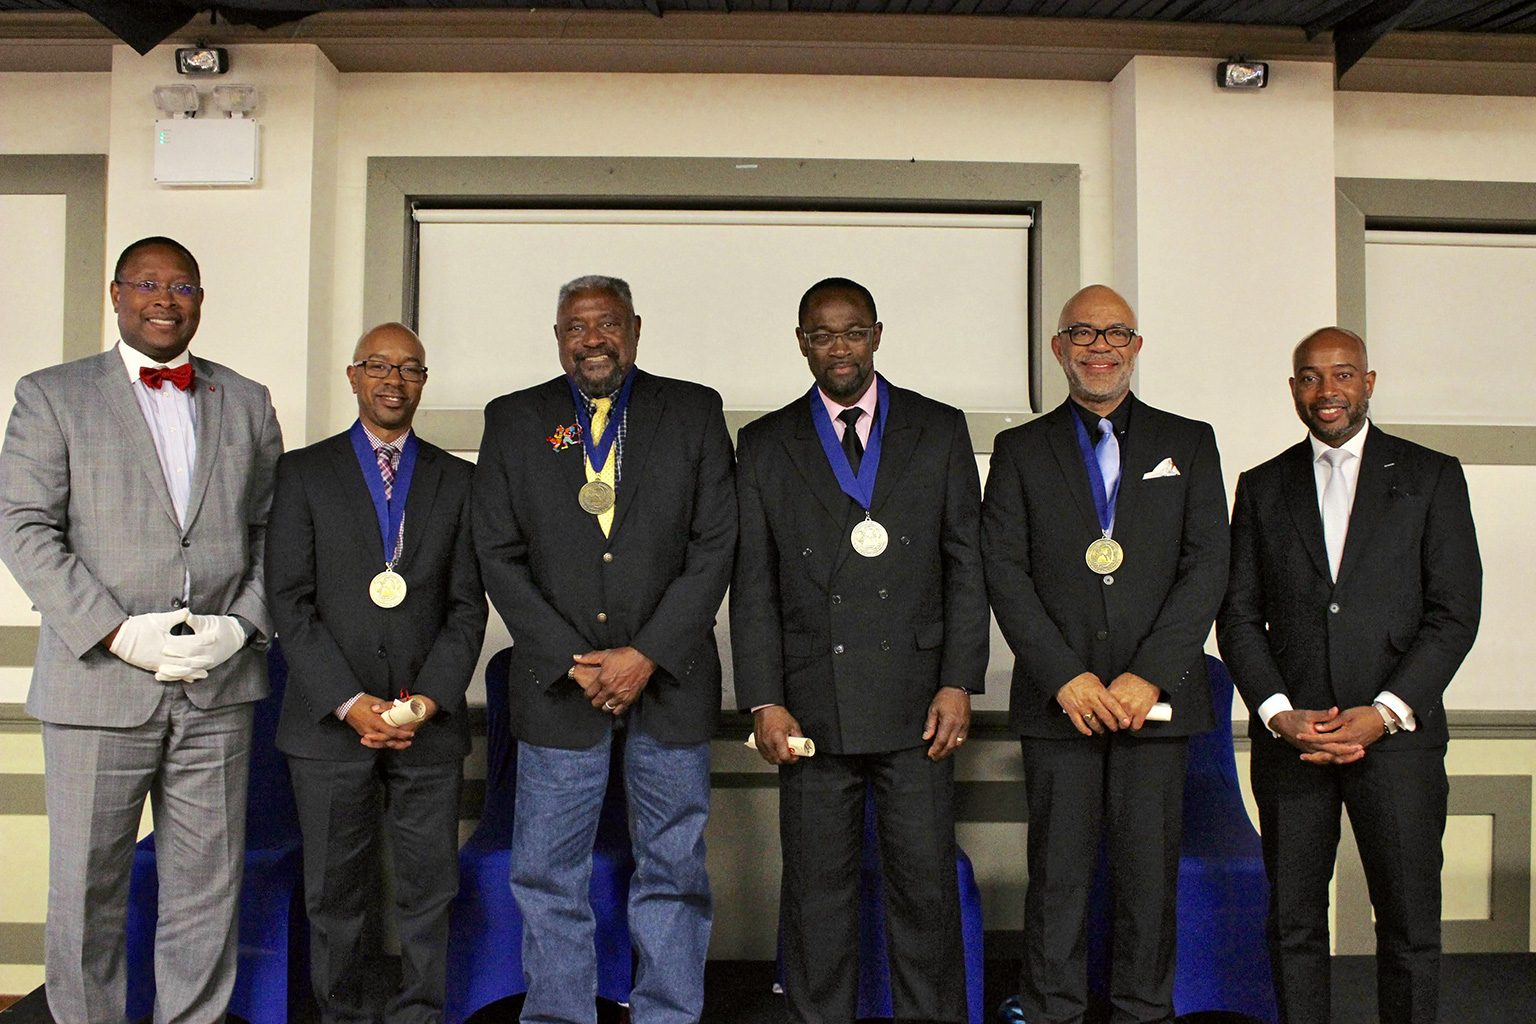 The 2018 recipients of the Warrior Award with Colloquium Co-Chairs Drs. Jerlando F. L. Jackson and James L. Moore III. Dean Watson is second from right.